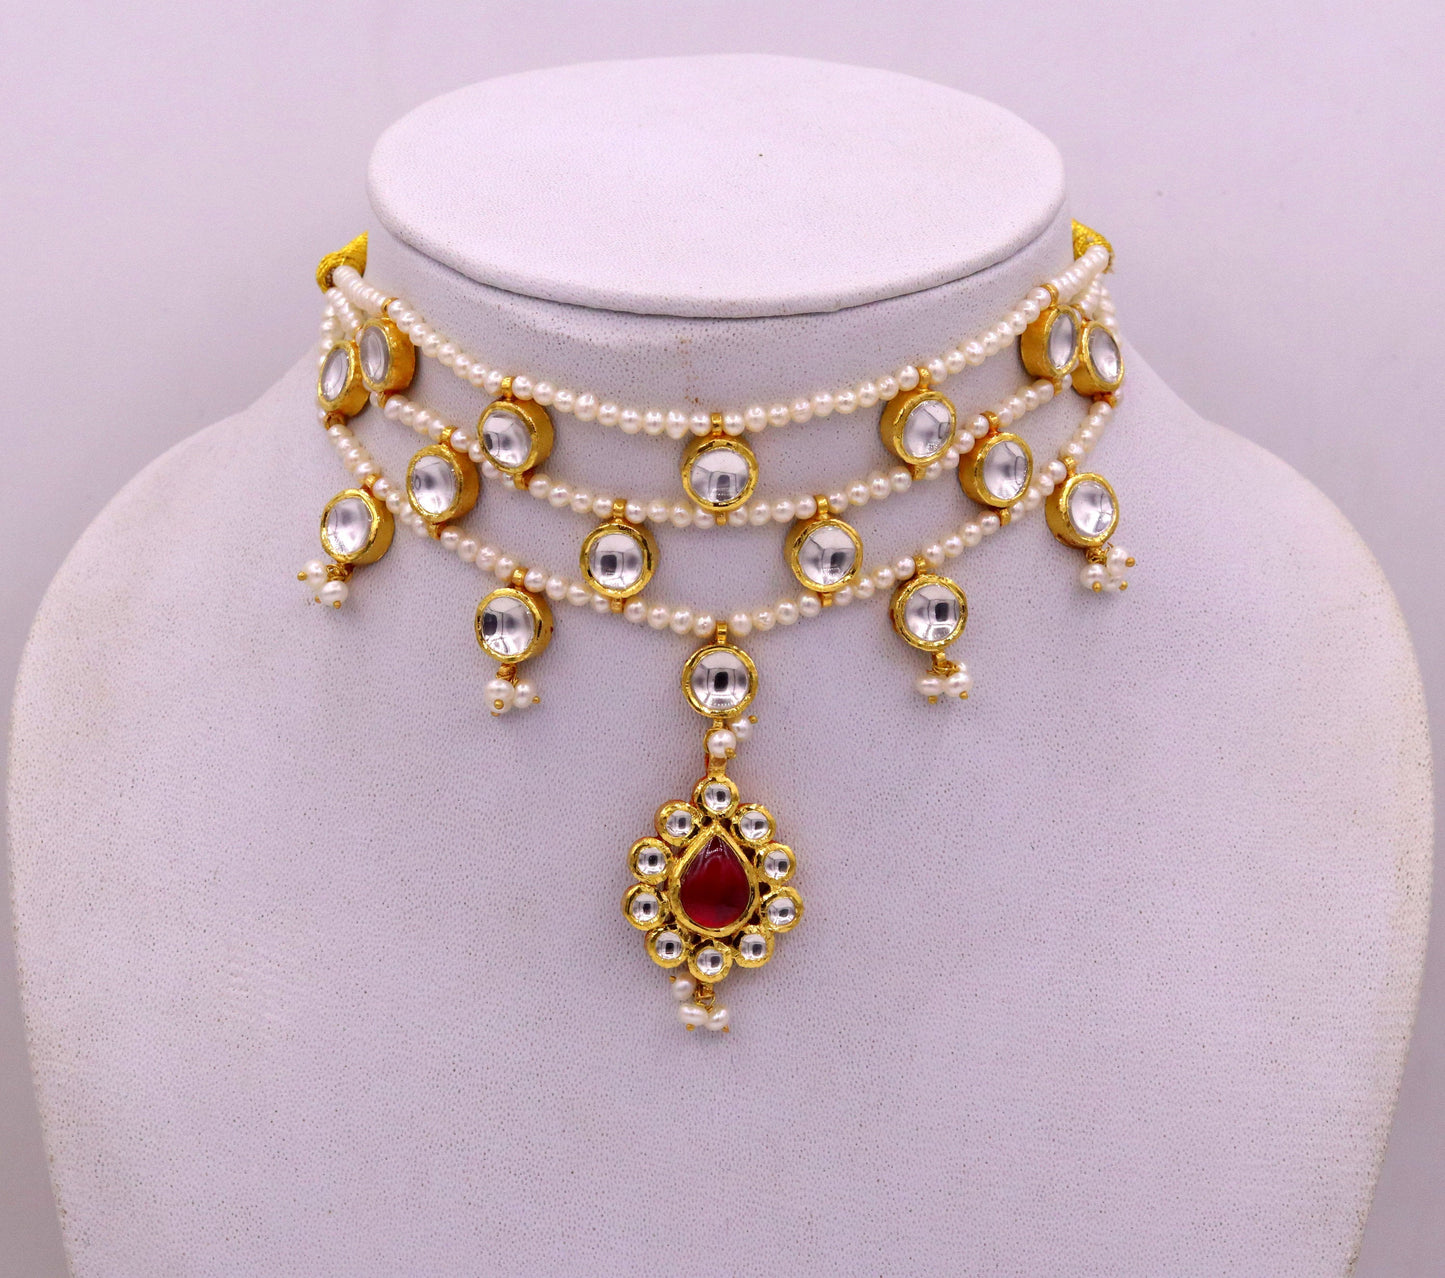 22K yellow gold handmade traditional Rajput antique style solid gold necklace with gorgeous tiny peal stone from Rajasthan India - TRIBAL ORNAMENTS